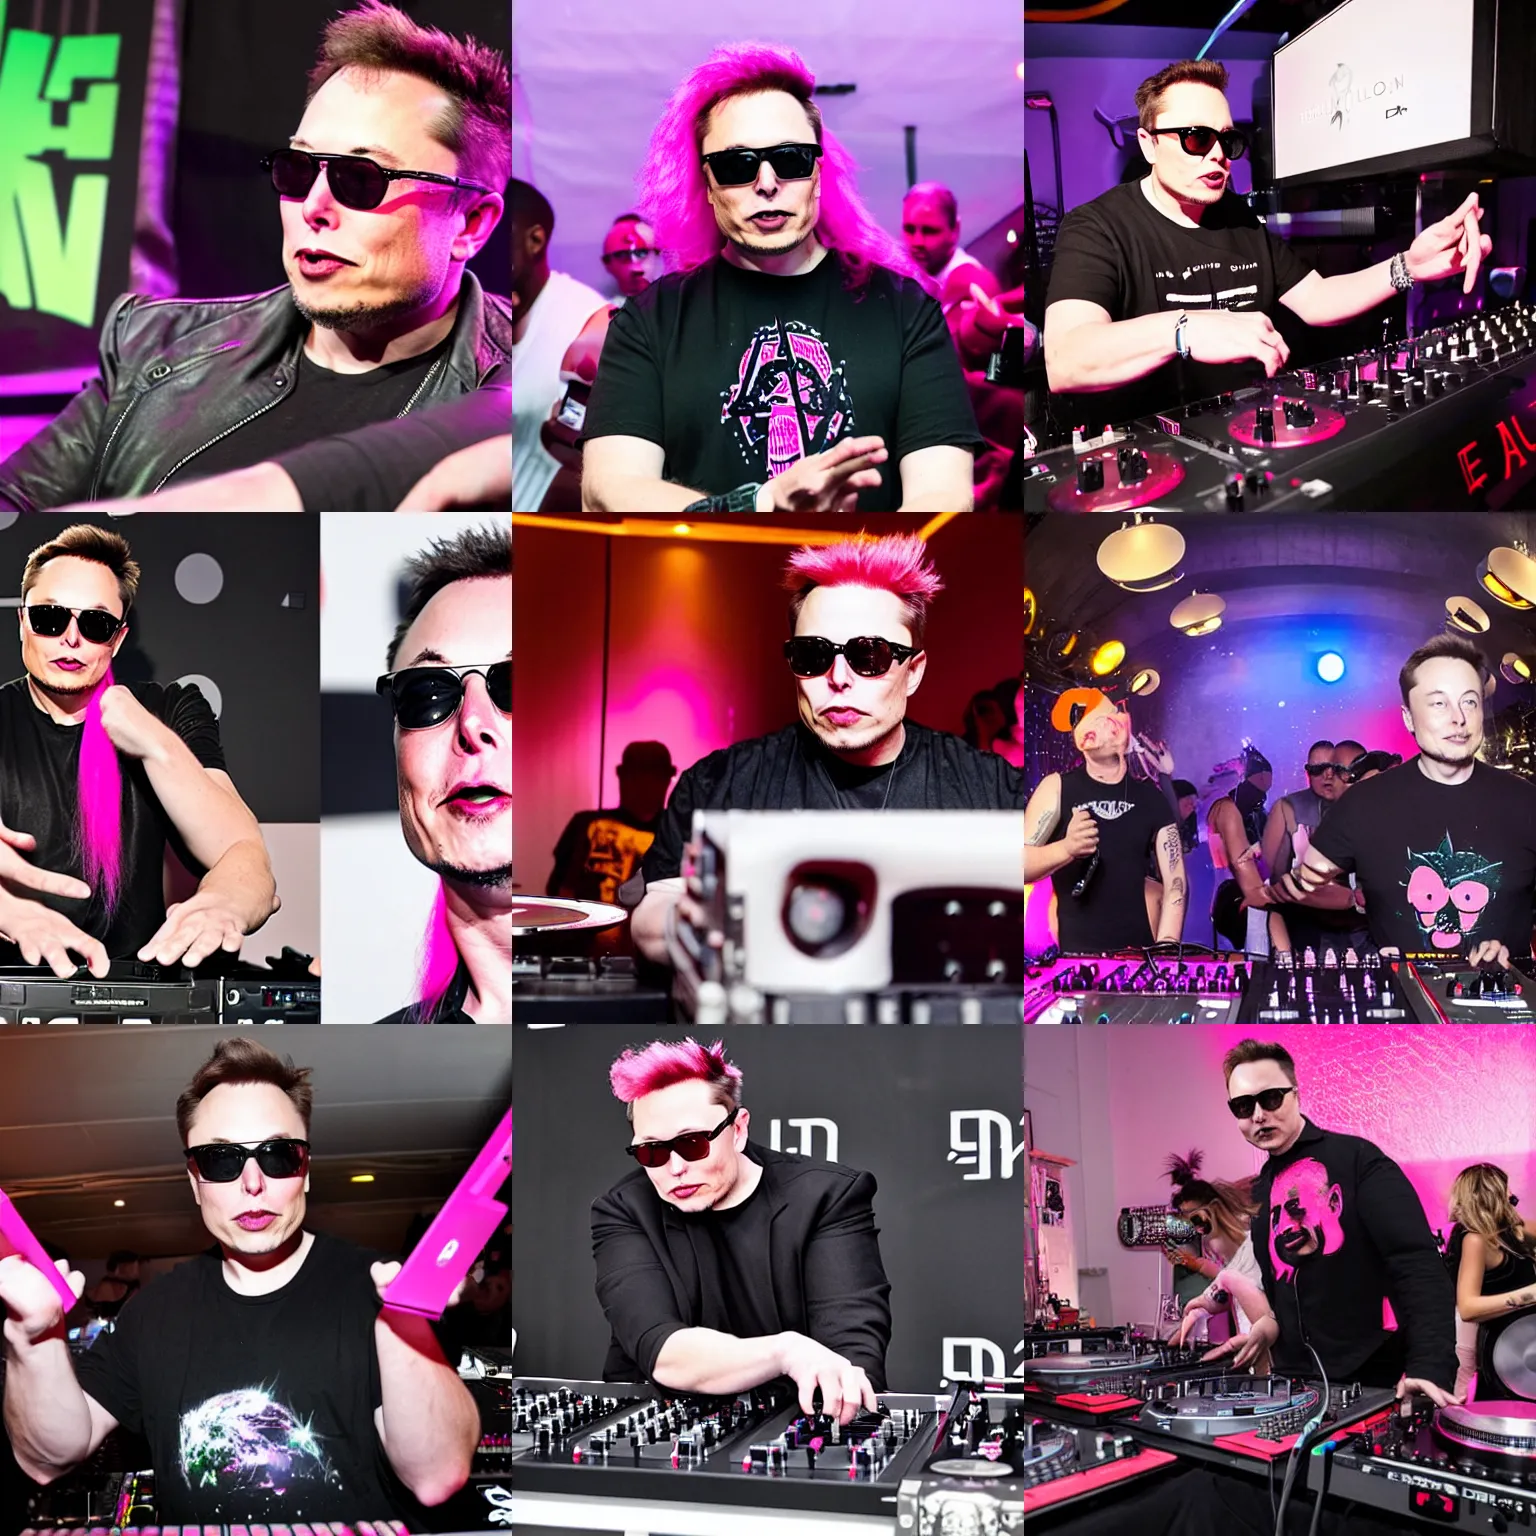 Prompt: Elon Musk with a pink mohawk and sunglasses DJing with DJ turntables, photoreal